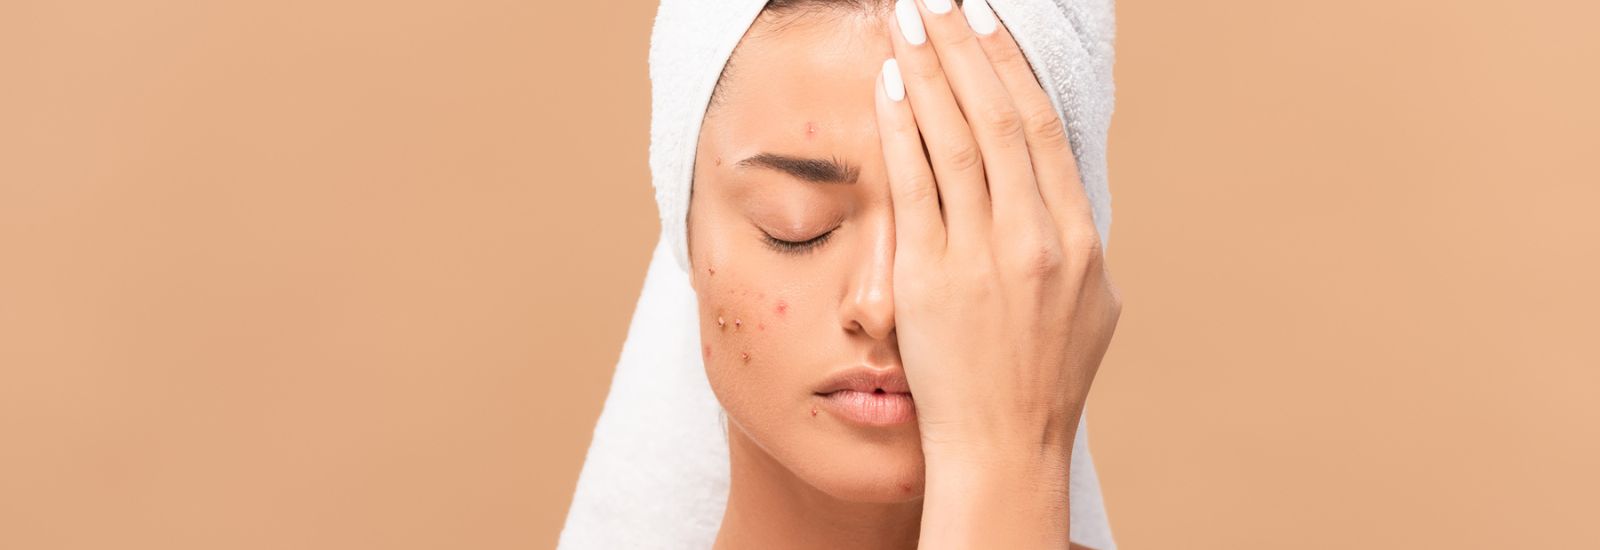 Zinc and Acne: Does It Help or Hurt?